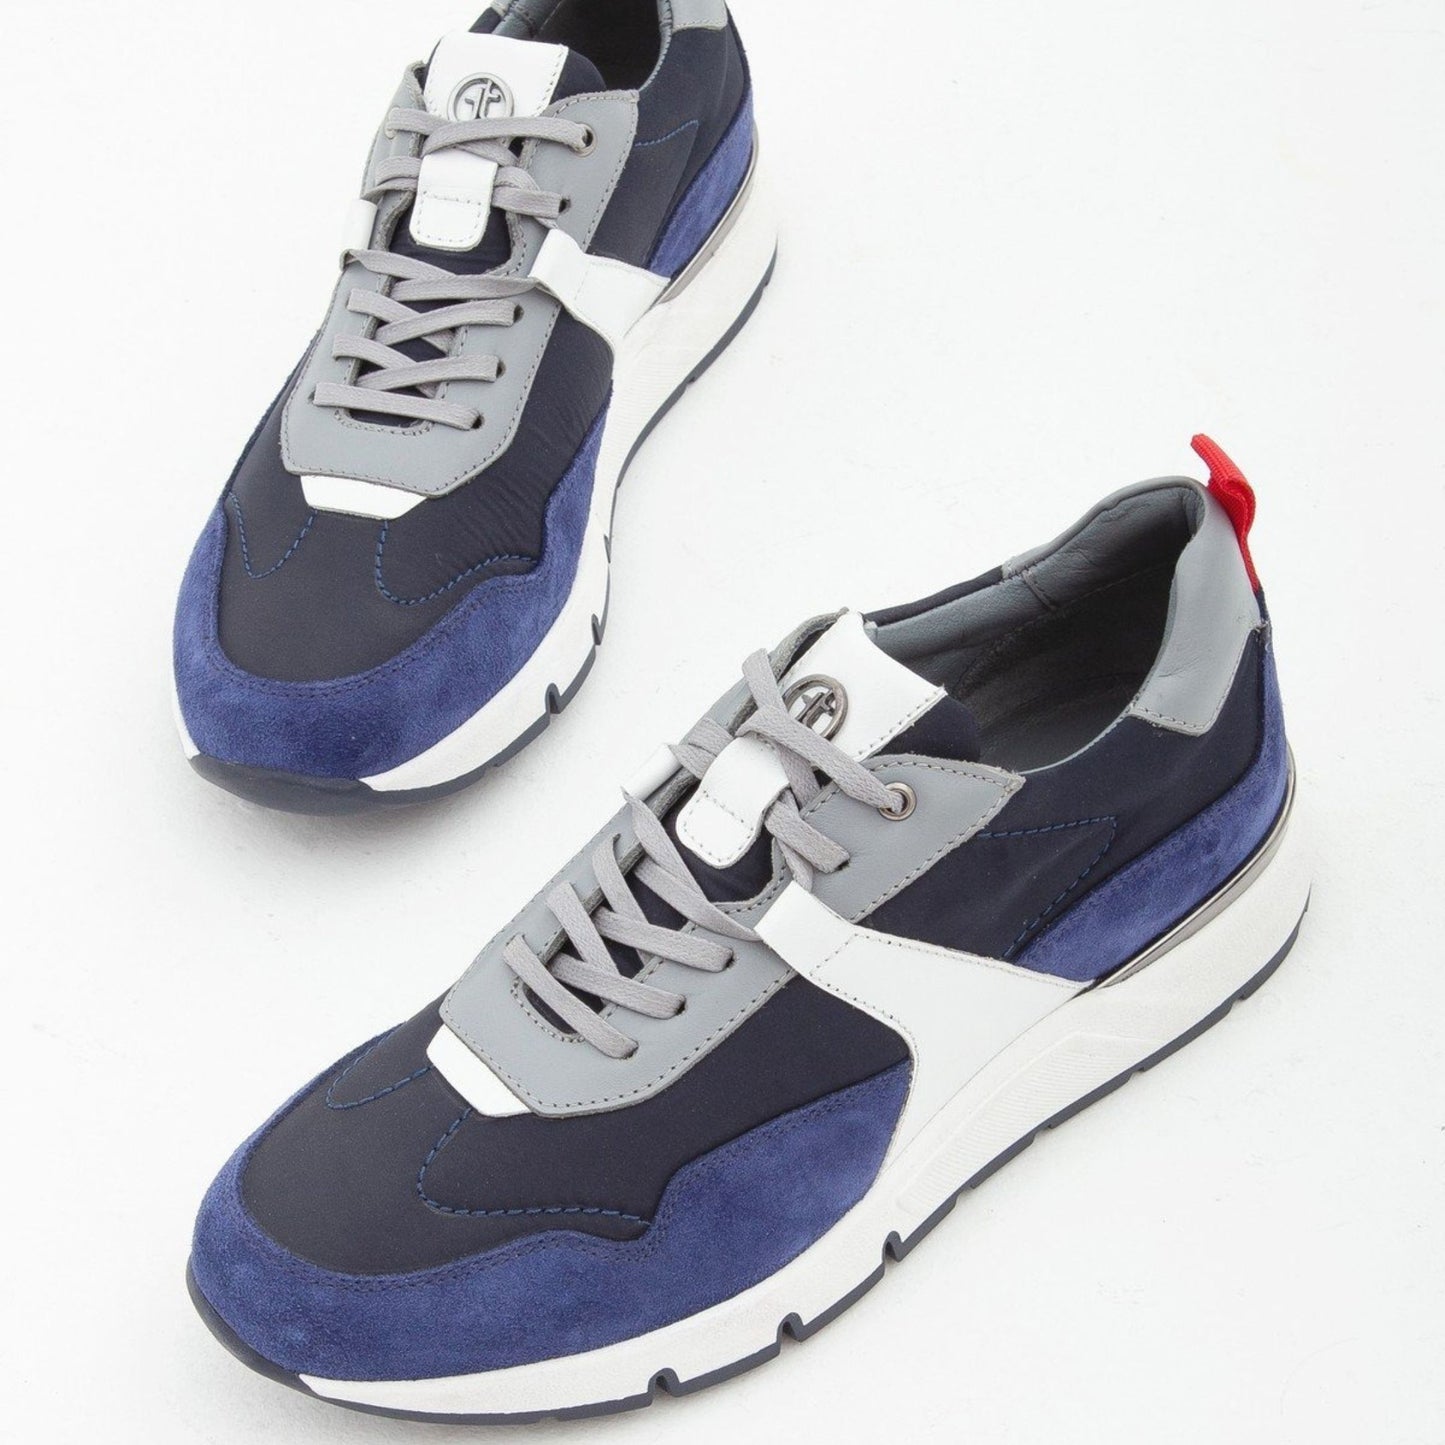 Madasat Navy Blue Casual Shoes - 585 |